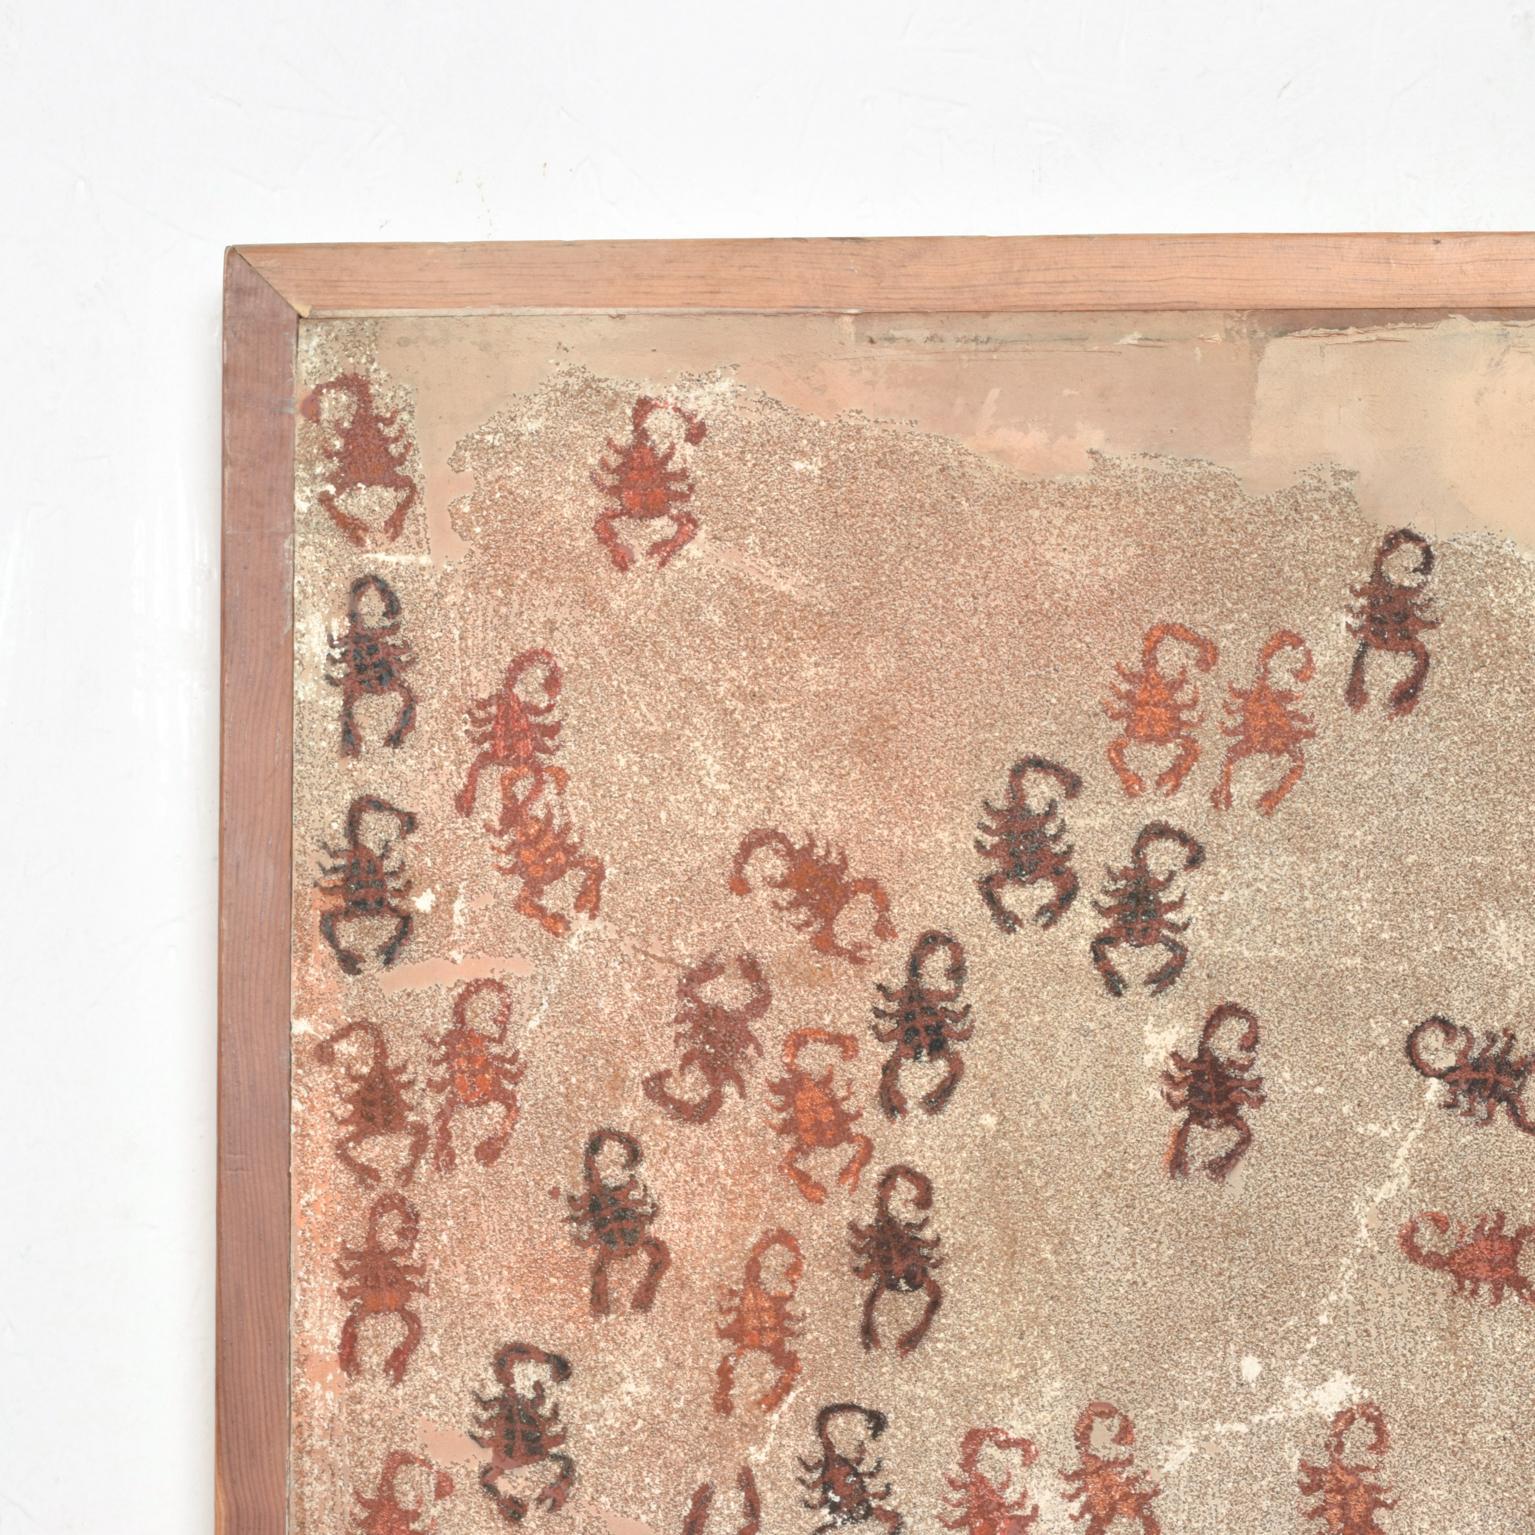 Famed Mexican Artist FRANCISCO TOLEDO (1940–2019) 
Latin American Master of combining diverse materials for mixed media.
Scorpions, Grasshoppers and Crickets.
No COA is available.
Signed lower left Toledo.
33H x 25 W x 2.25D
Original unrestored